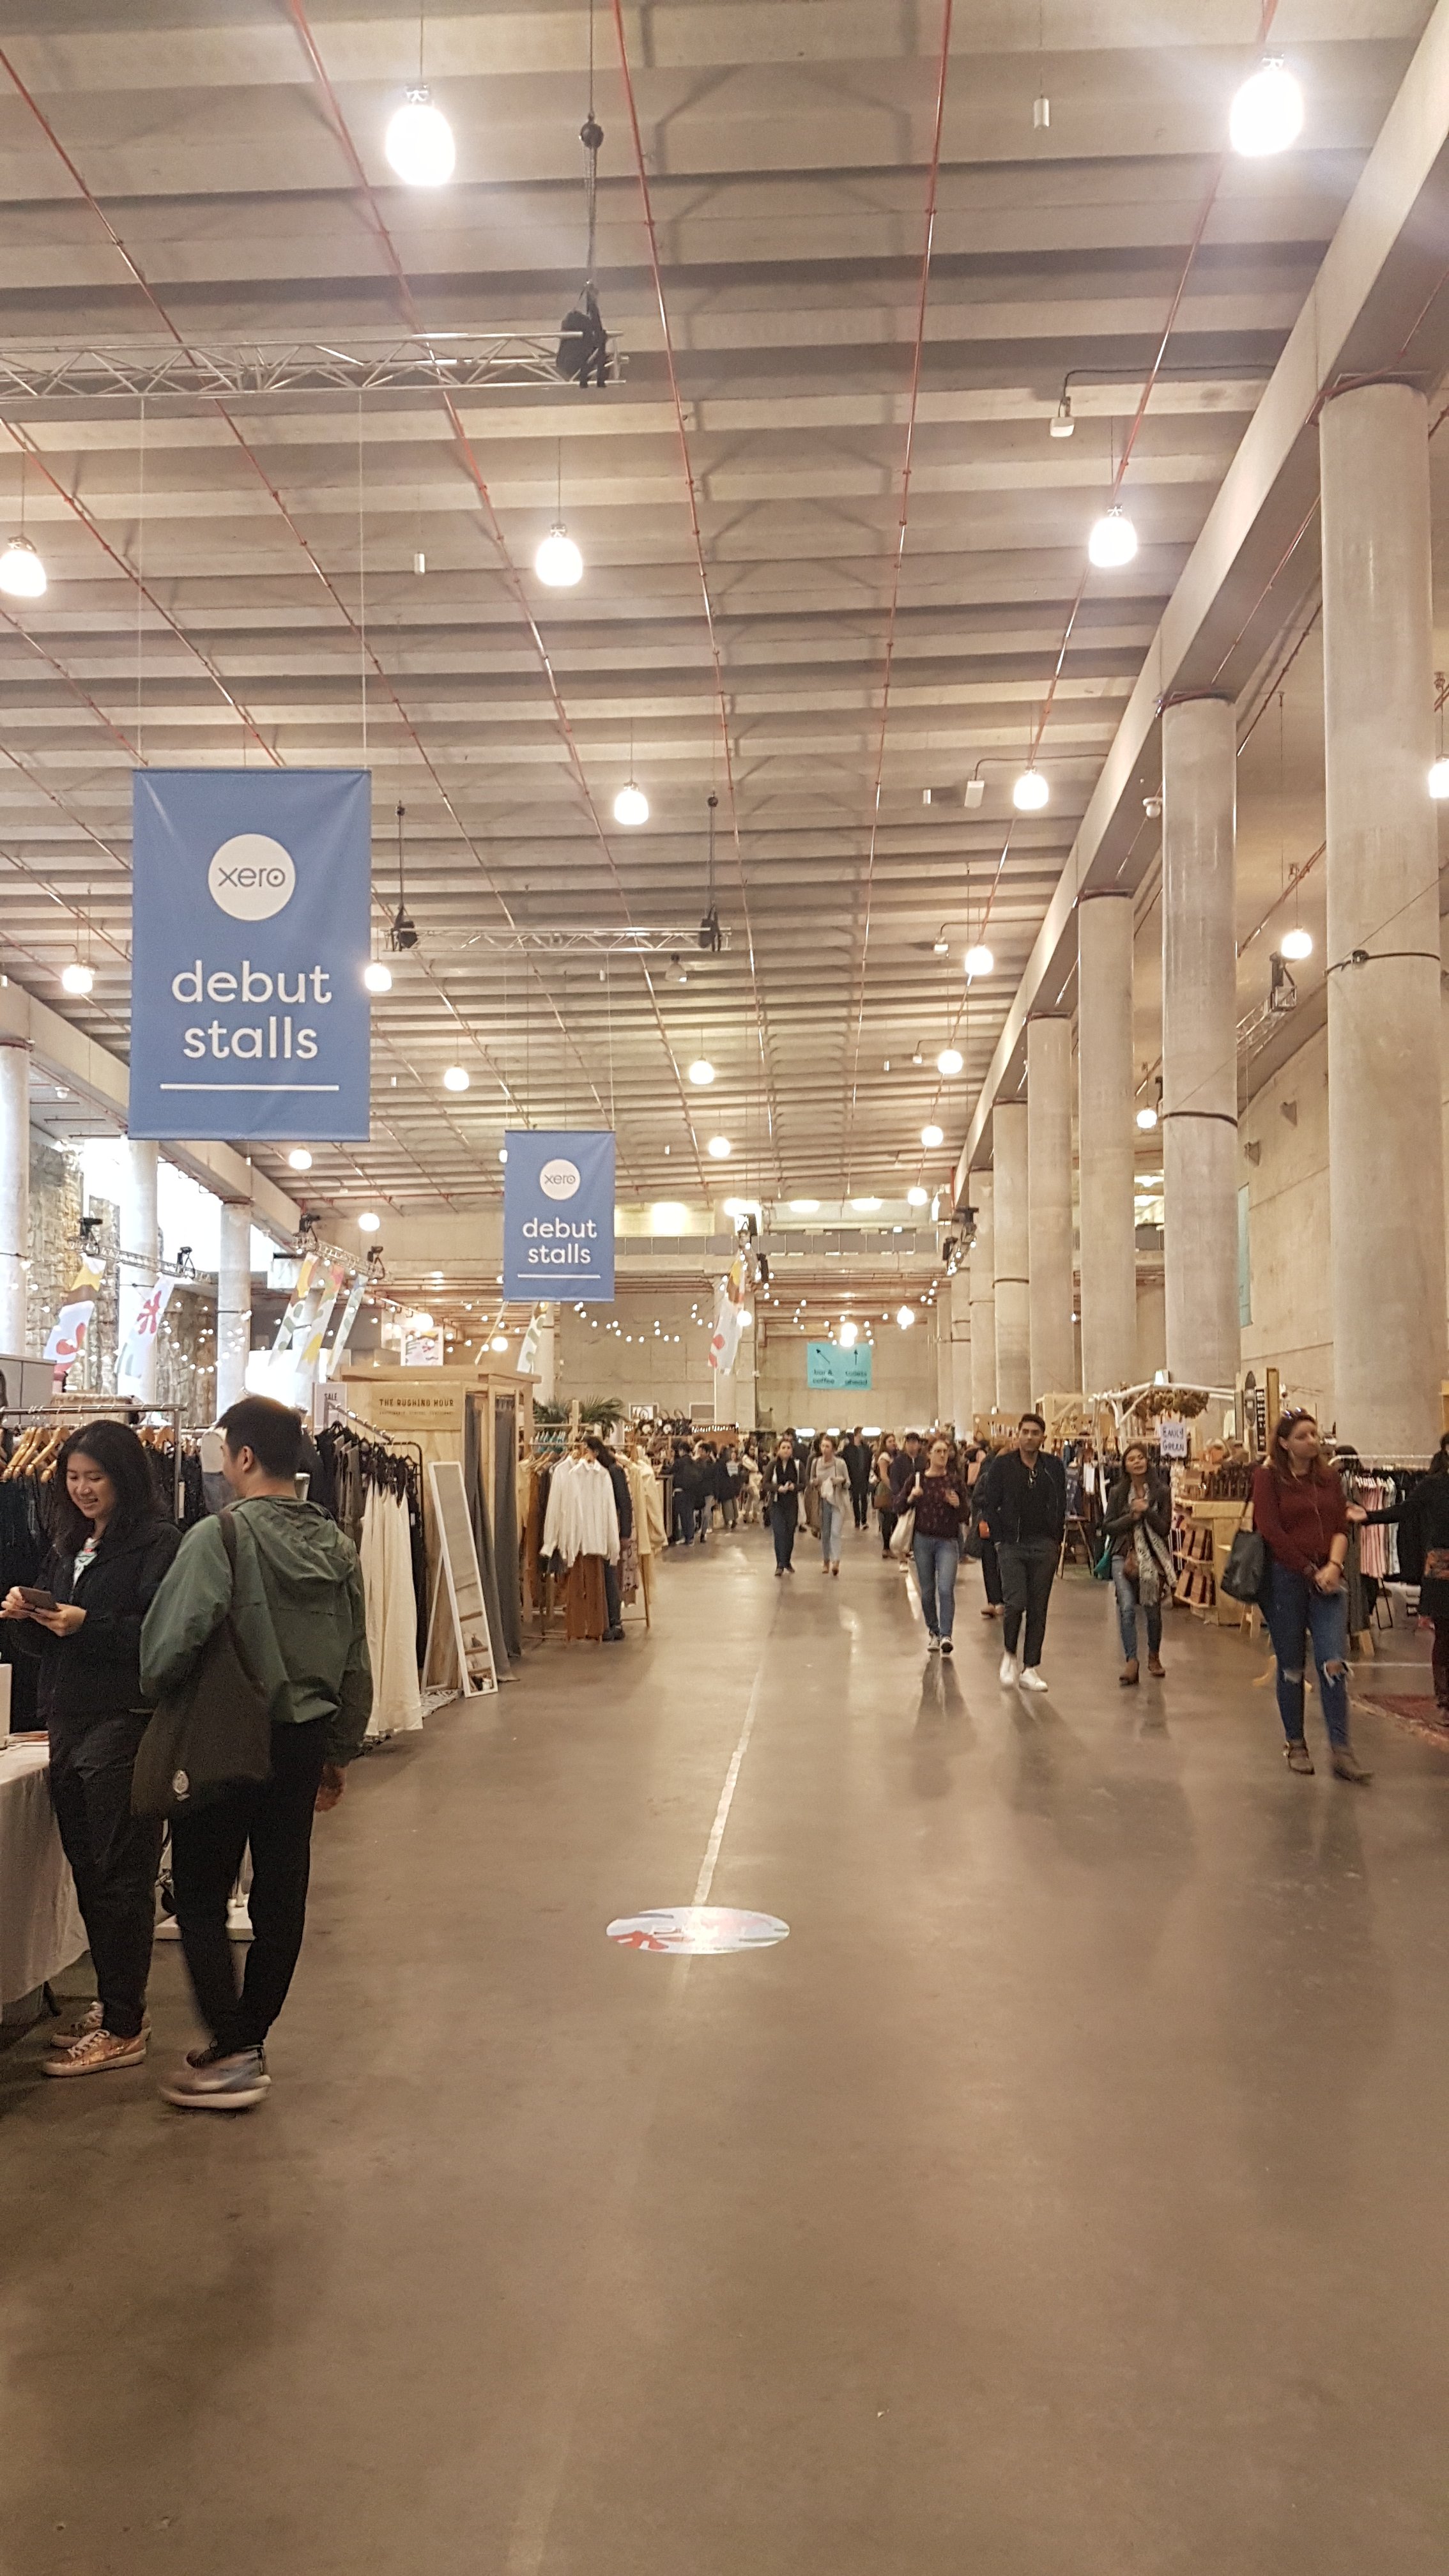 People stand in front of stalls in a large industrial space.